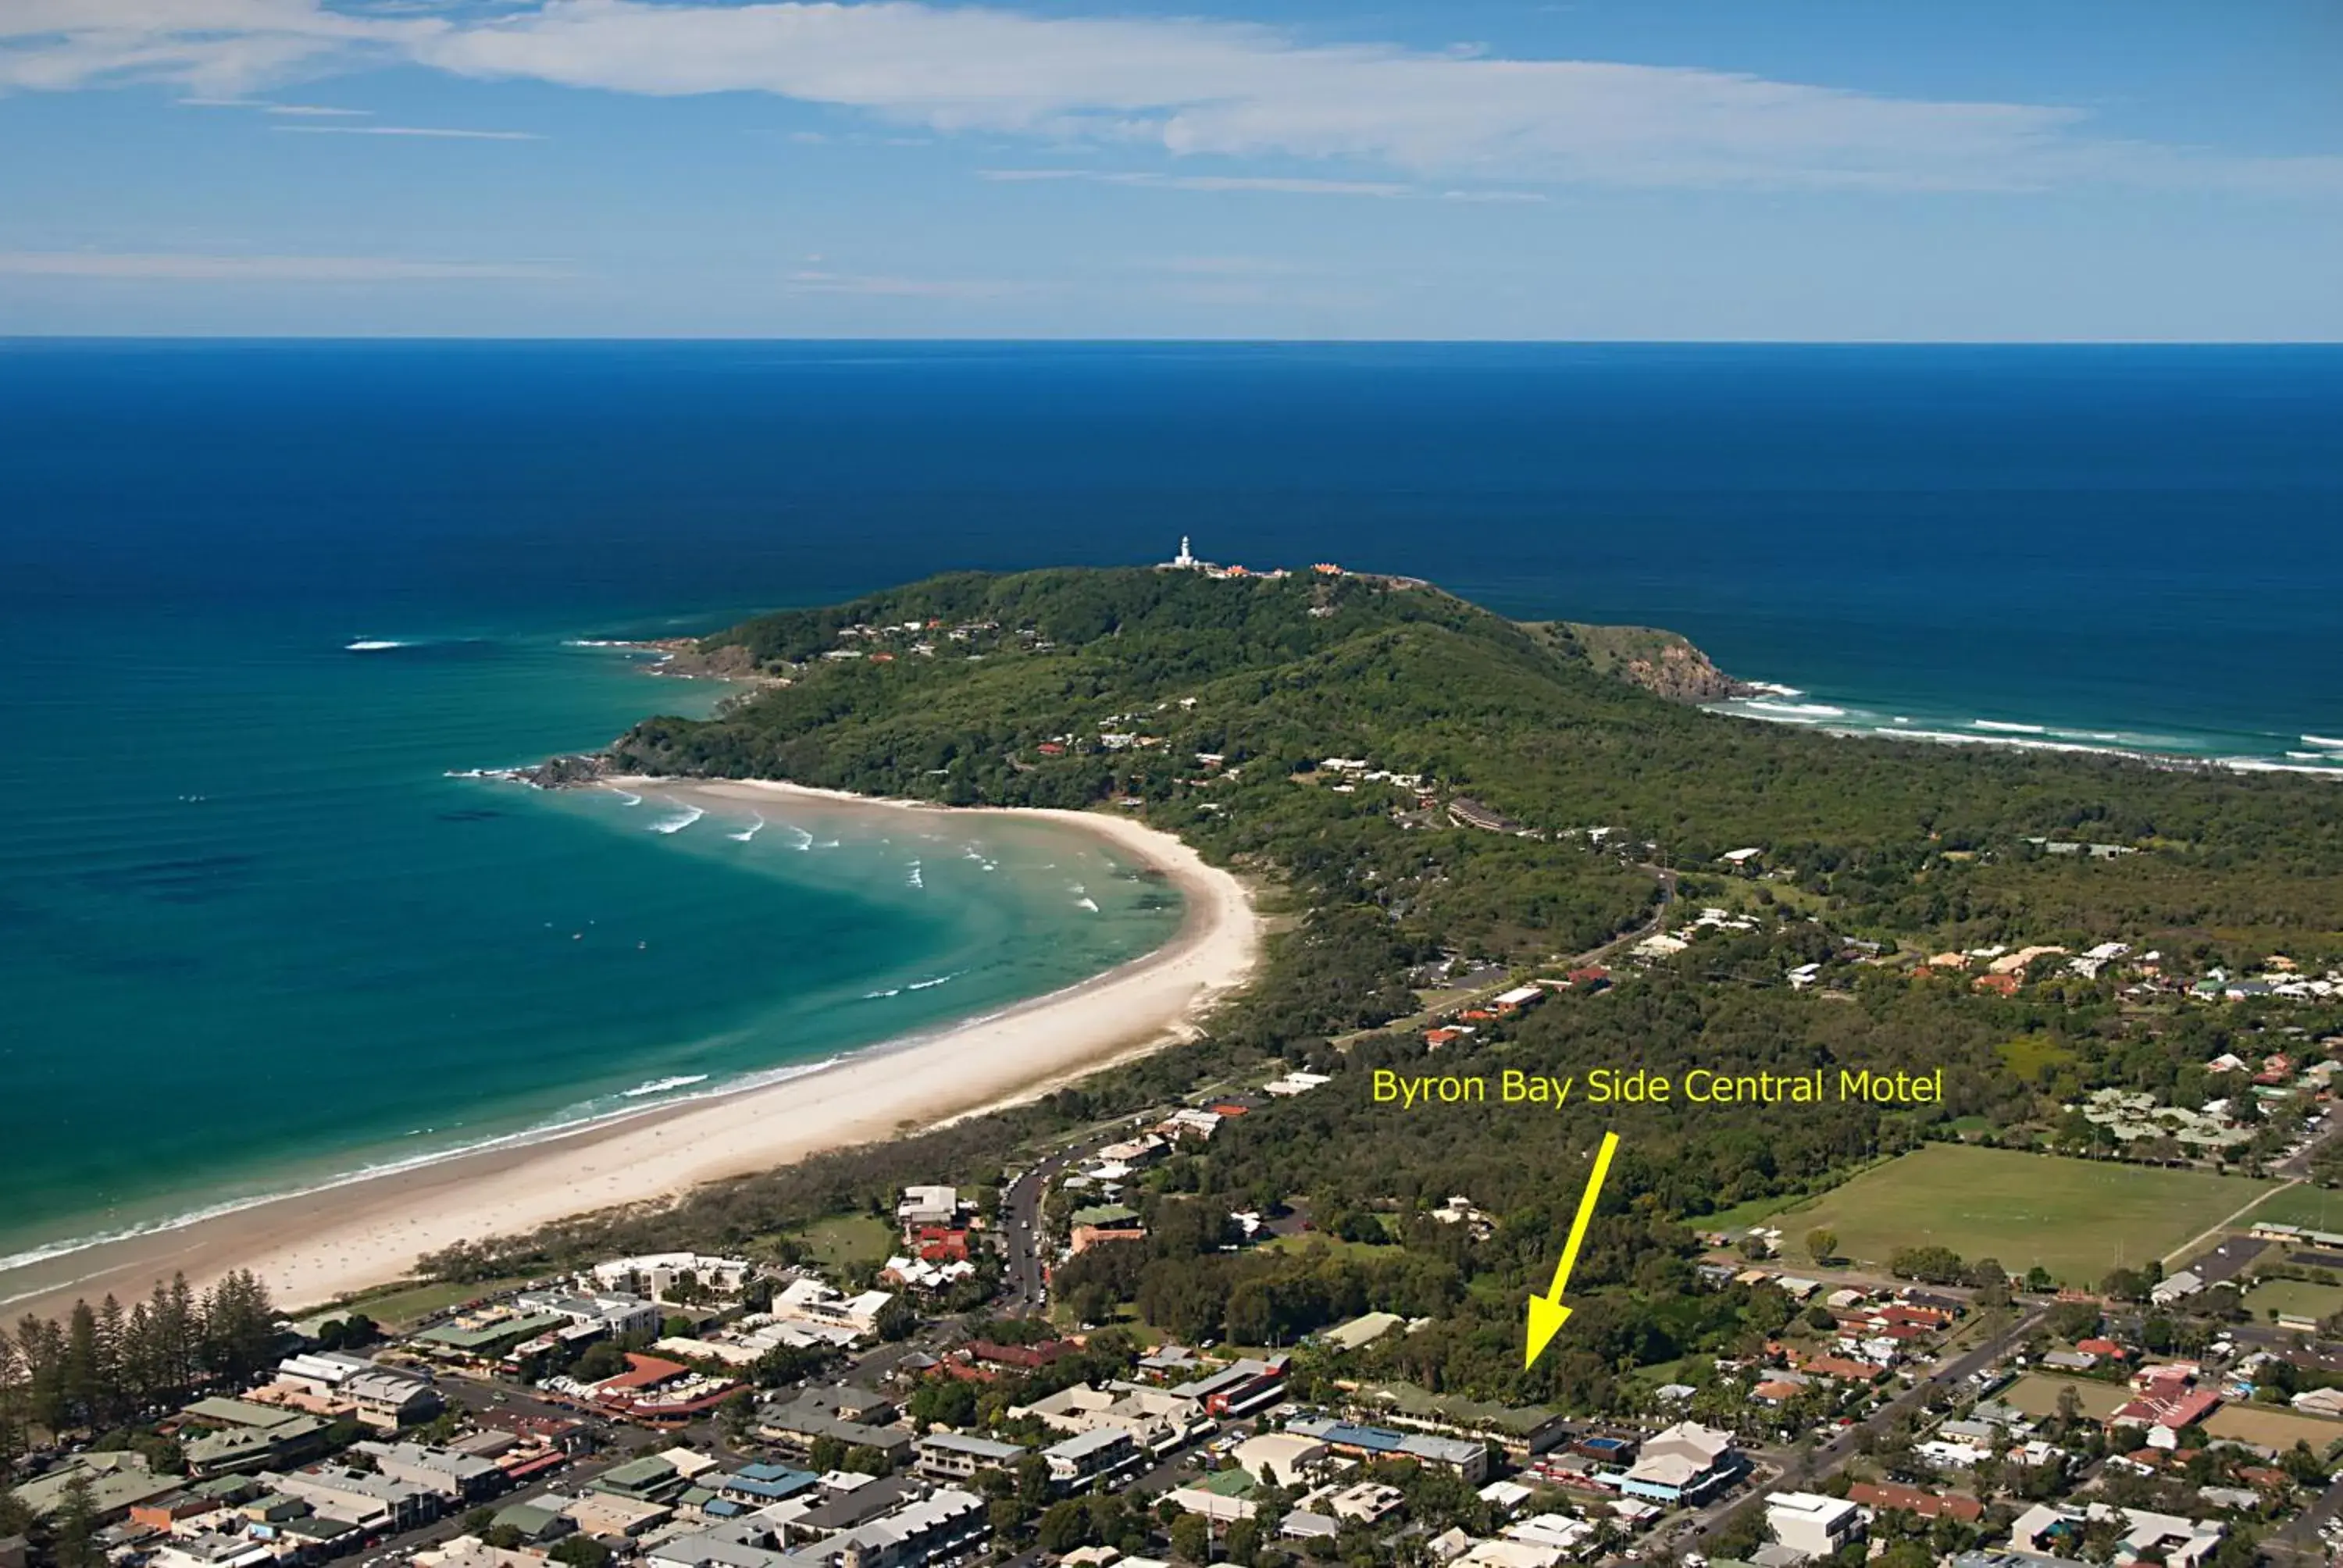 Area and facilities, Bird's-eye View in Byron Bay Side Central Motel